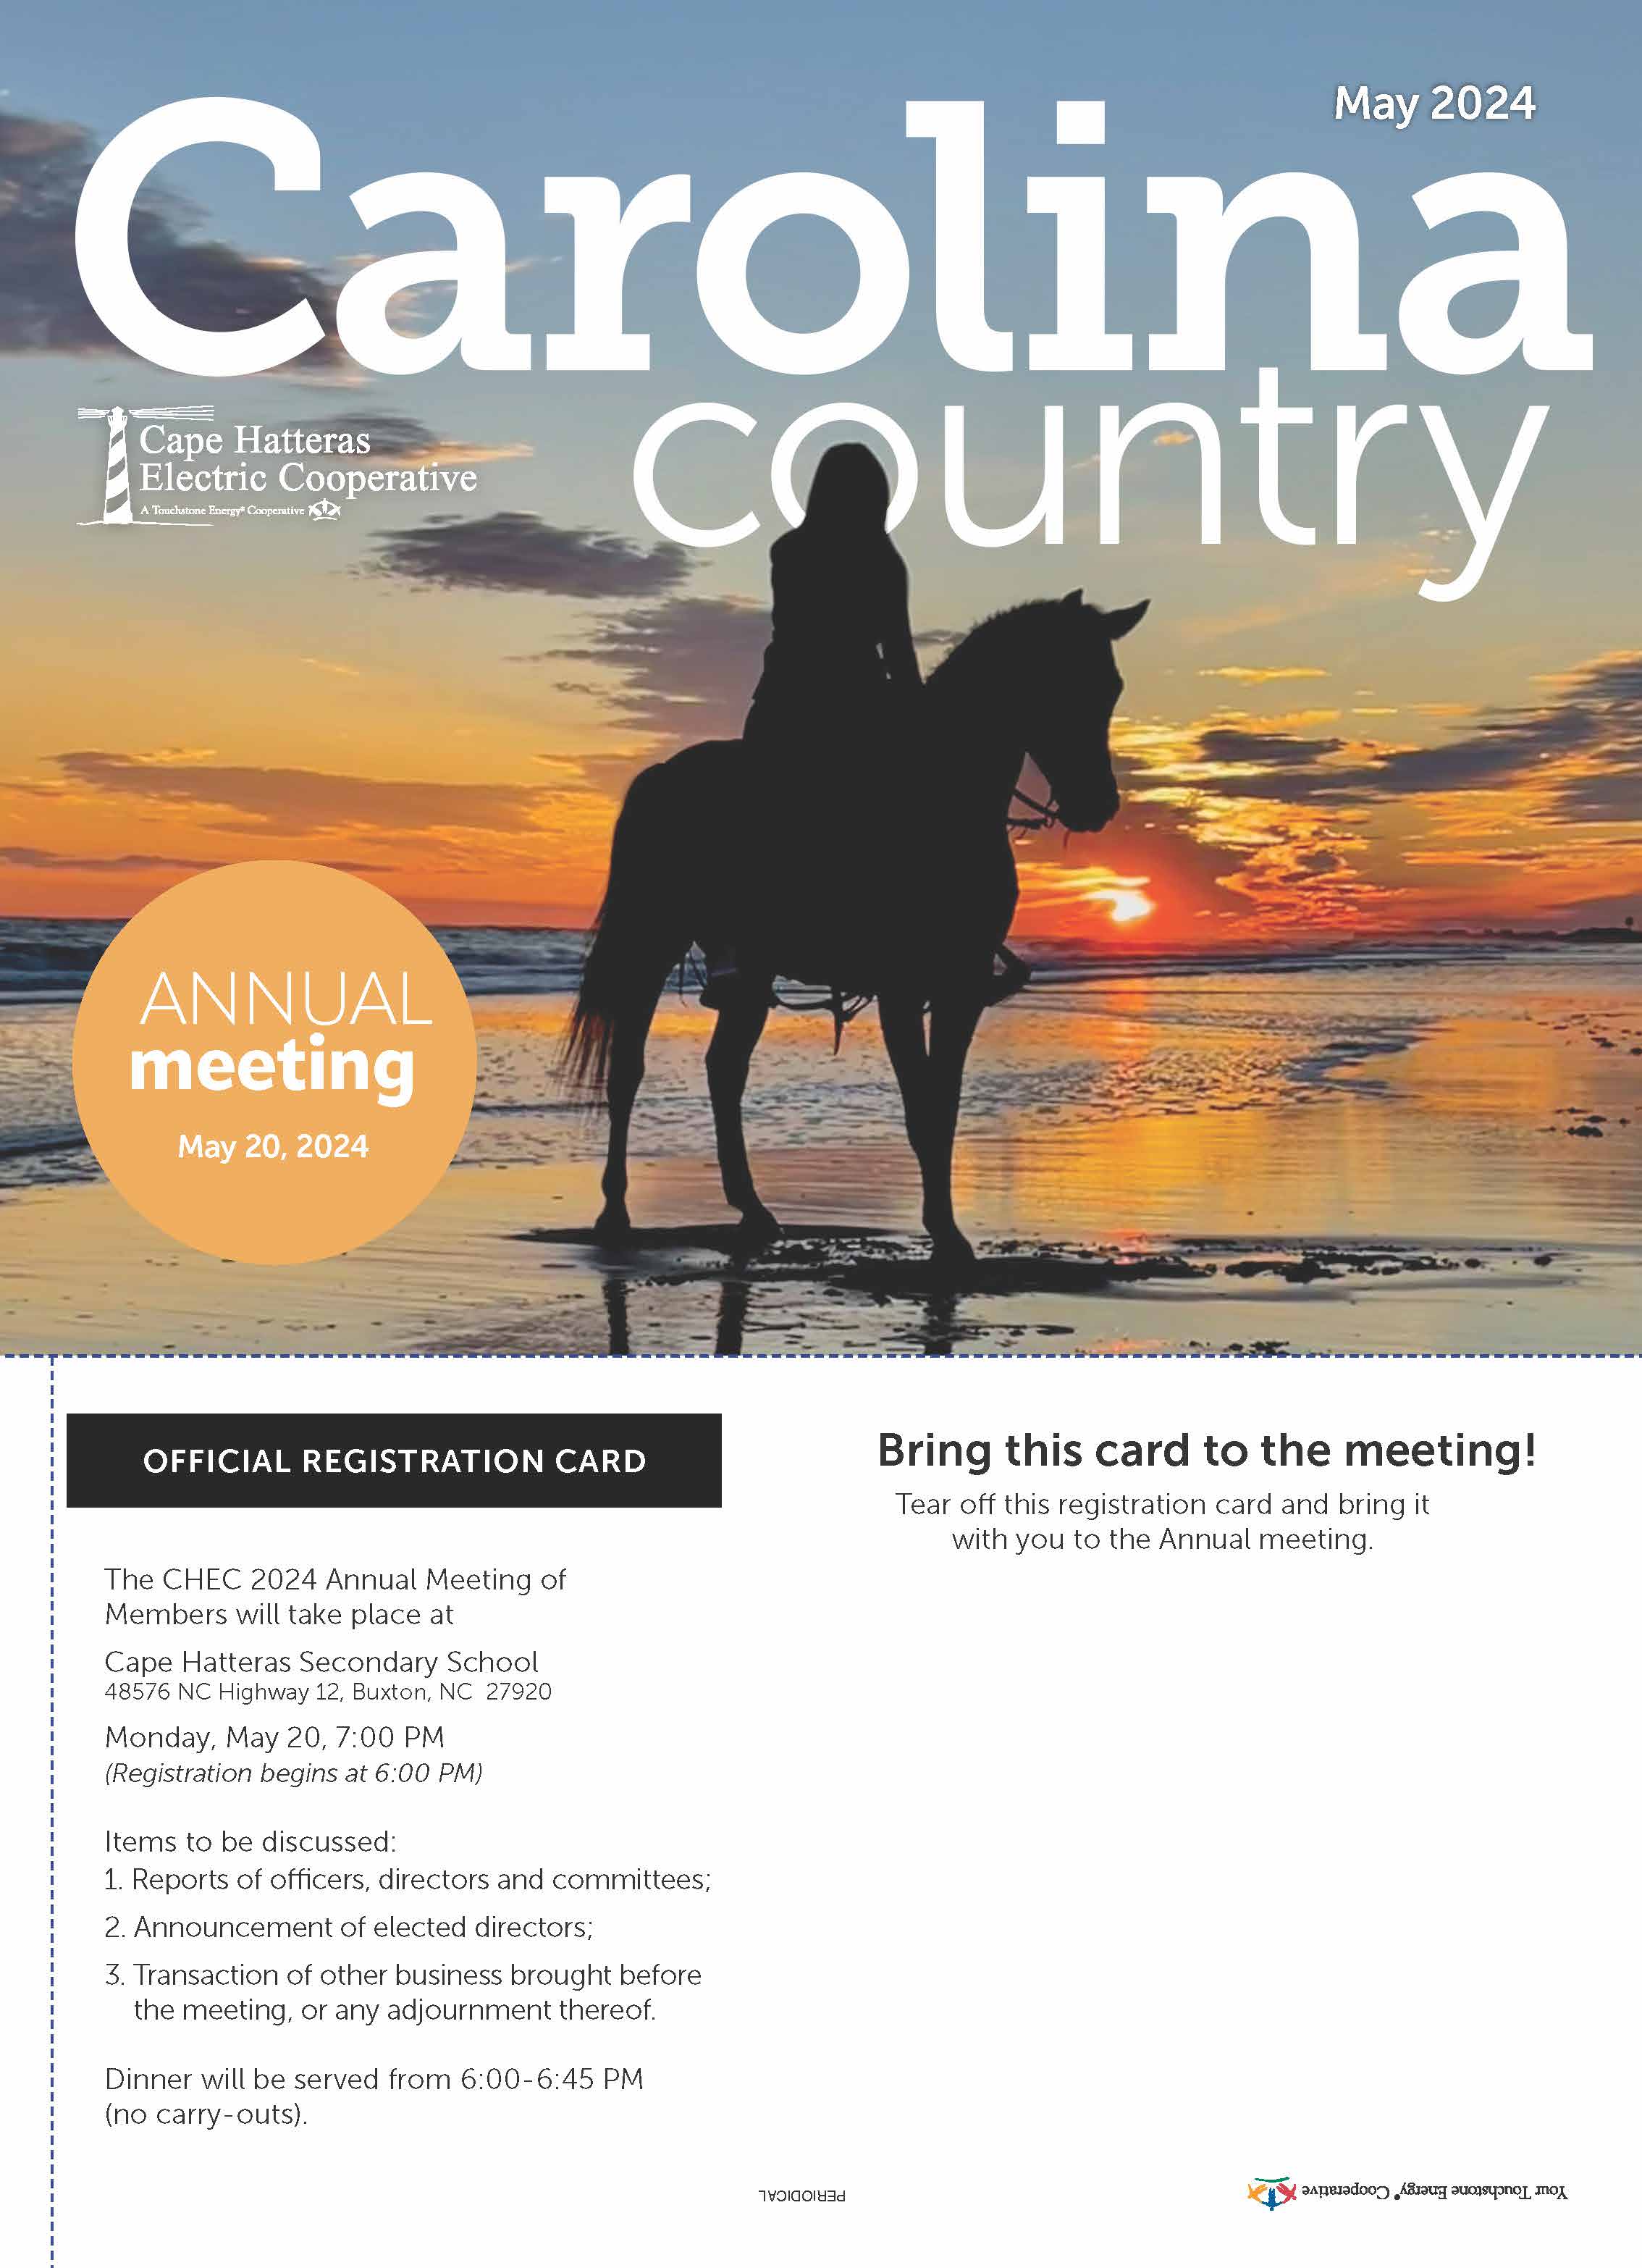 May Carolina Country Cover, Horse on sunset beach